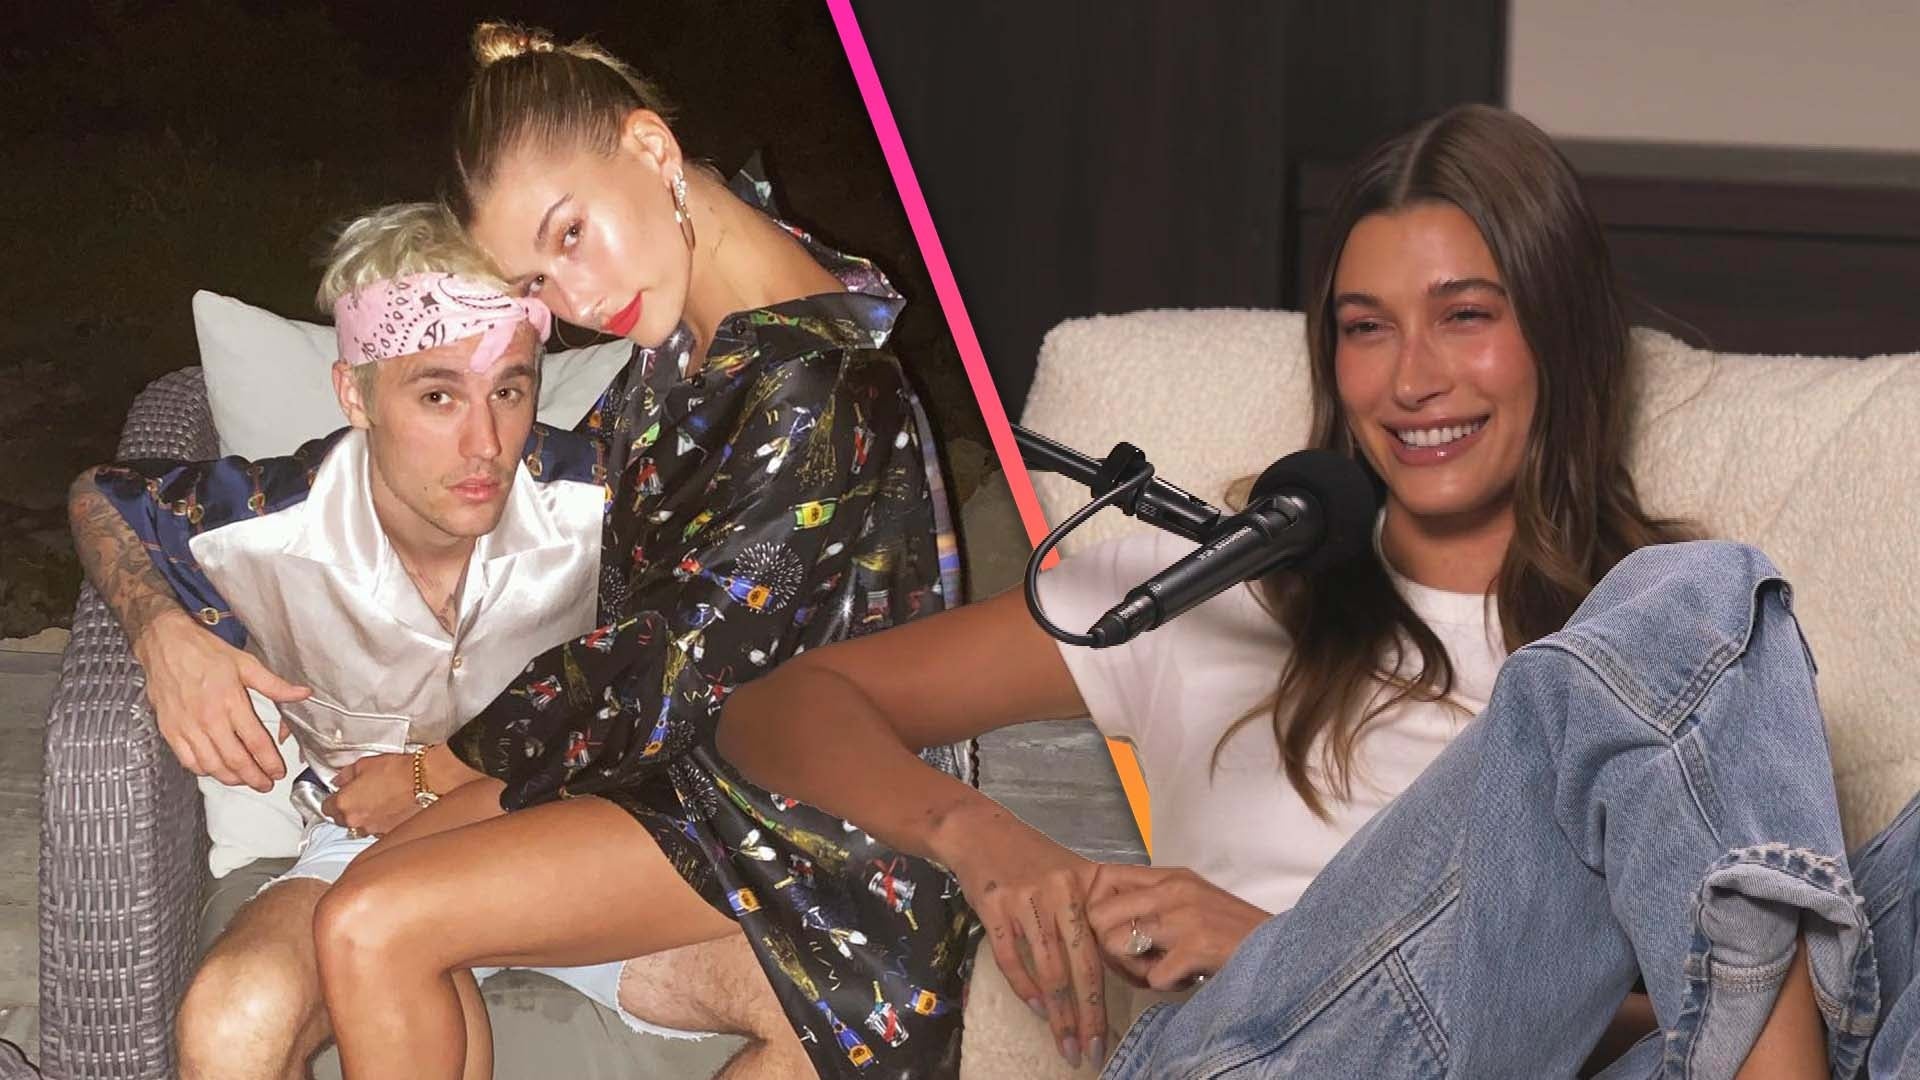 Hailey Bieber Details Her Sex Life With Justin Bieber From Positions to Turn